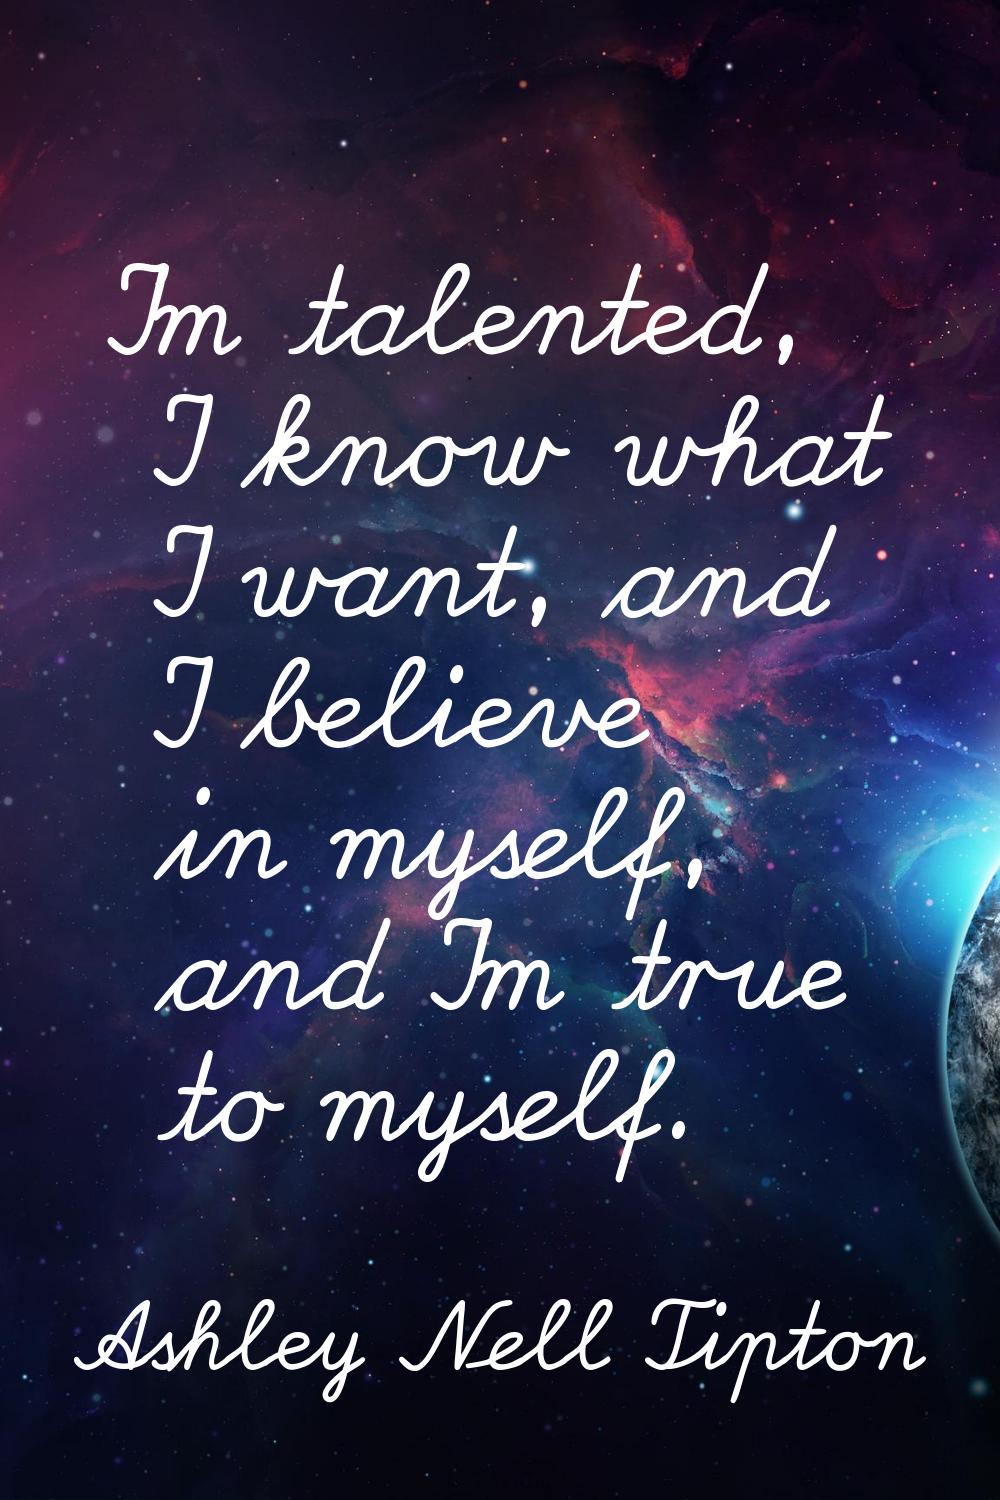 I'm talented, I know what I want, and I believe in myself, and I'm true to myself.